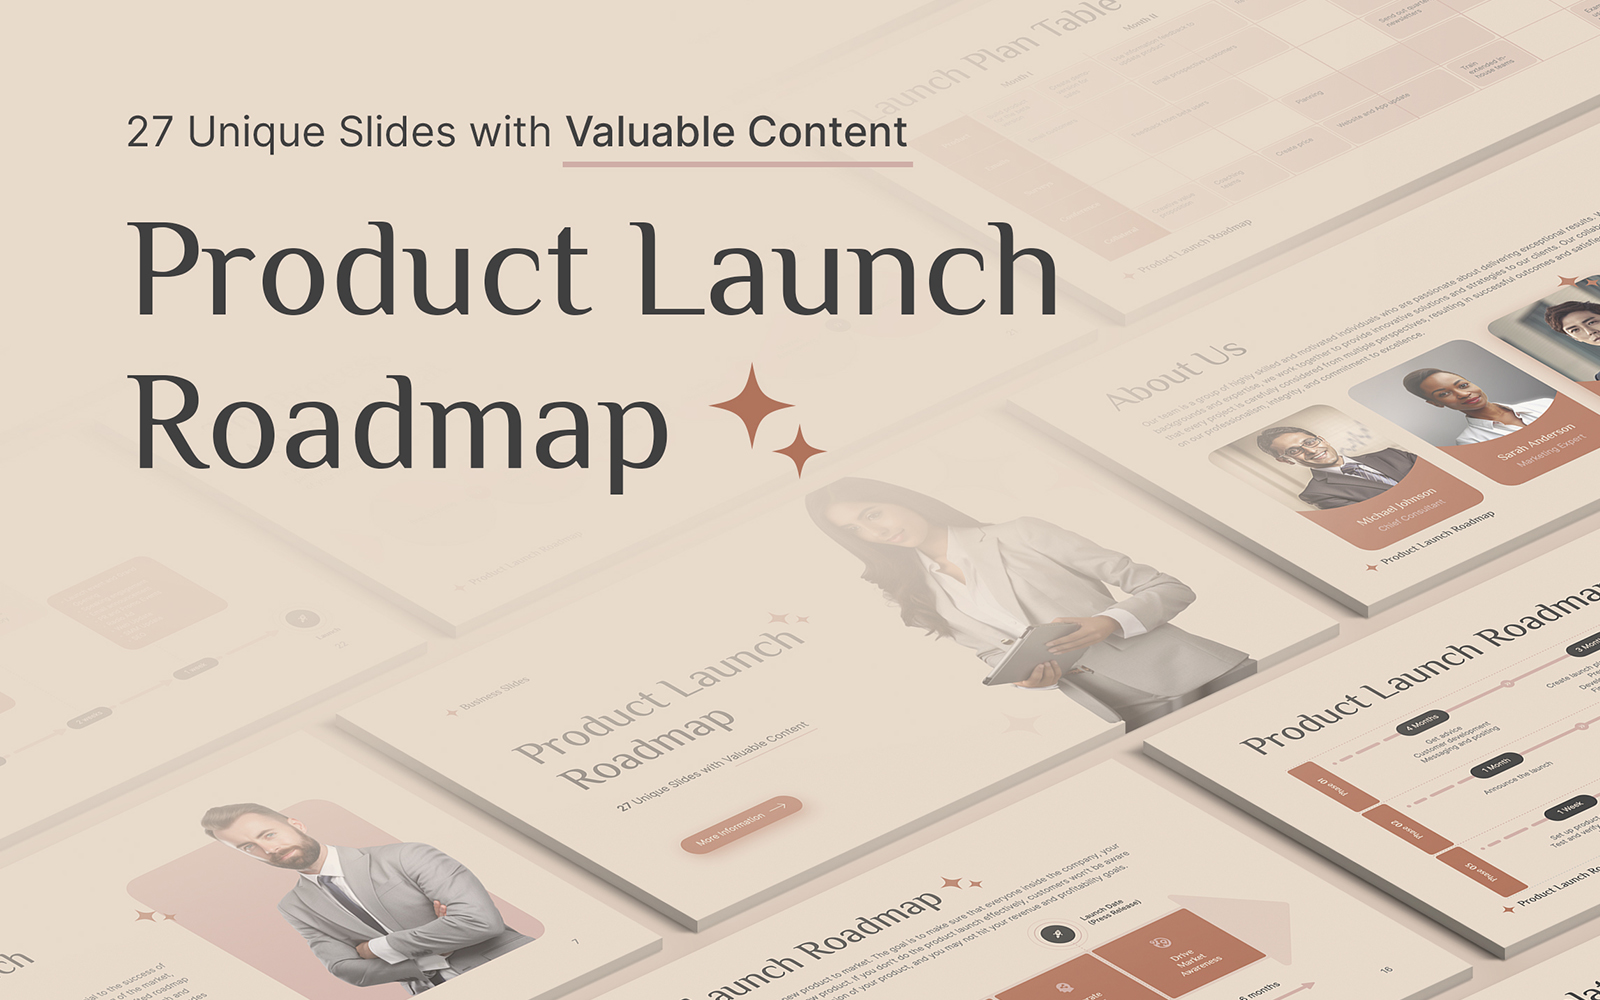 Product Launch Roadmap for Keynote